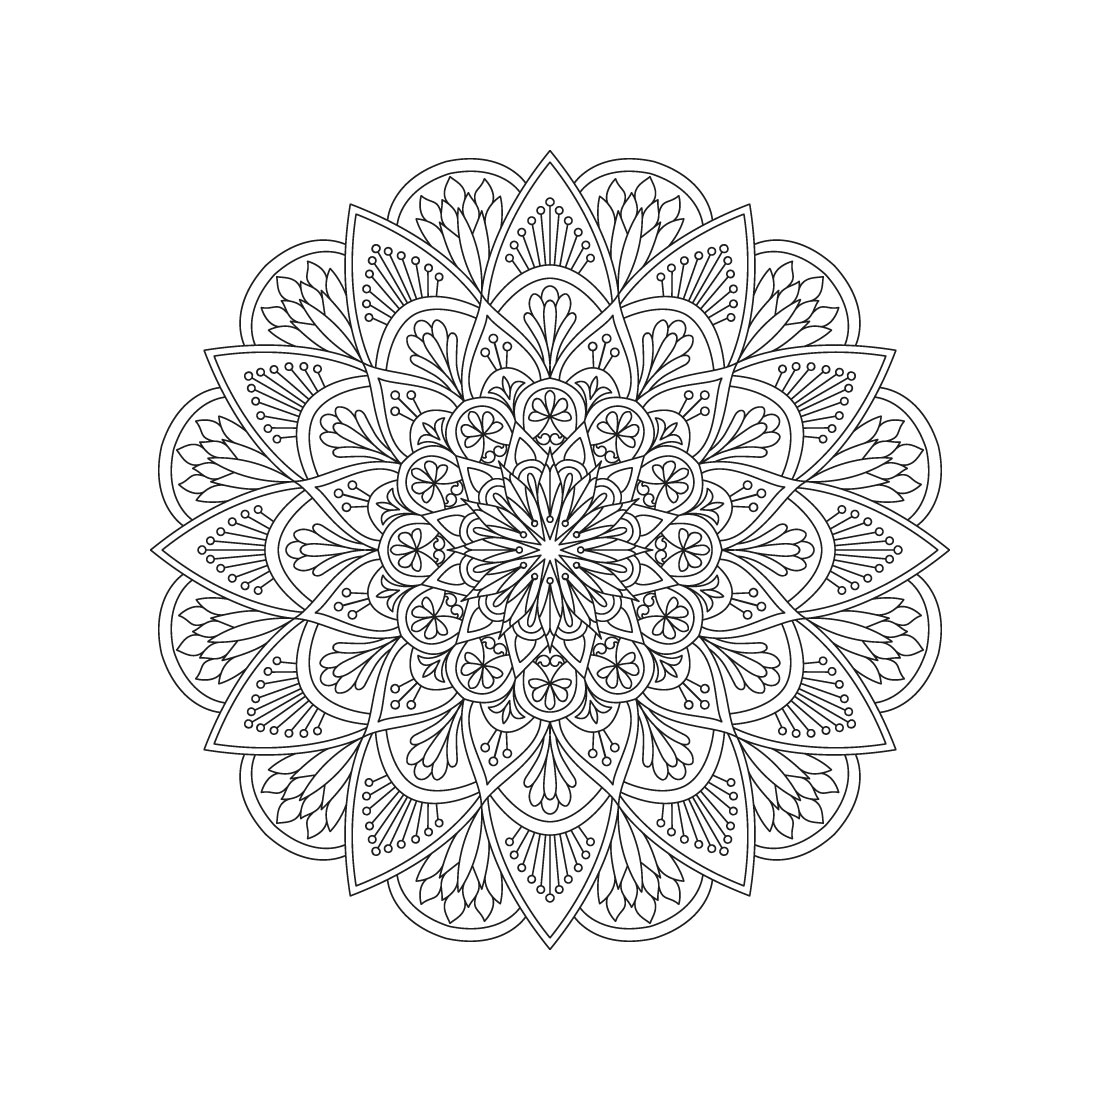 bundle of 10 cosmic delight mandala coloring book pages 03 994